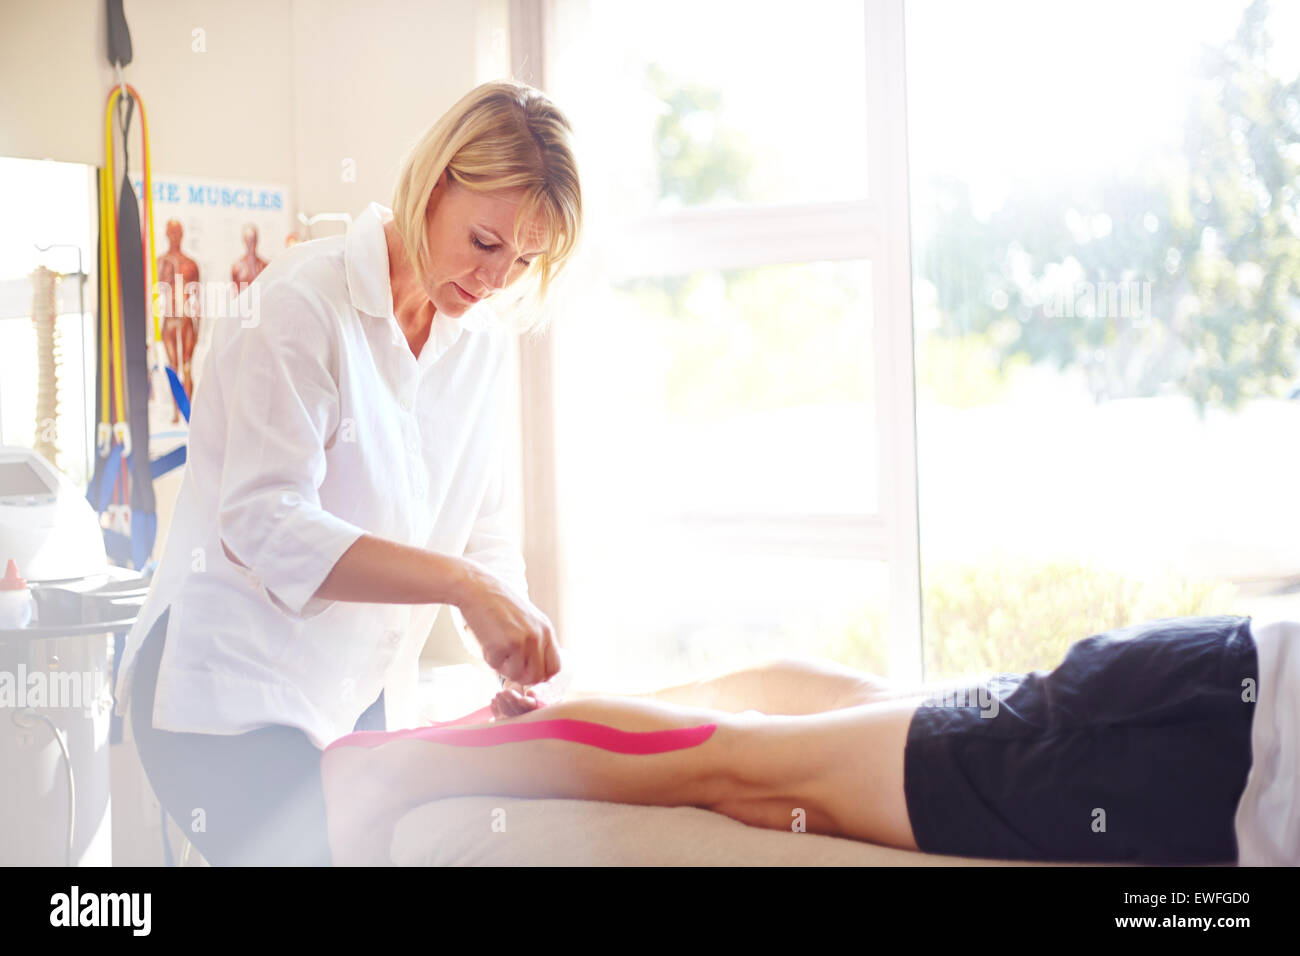 Physical therapist applying kinesiology tape to man’s leg Stock Photo